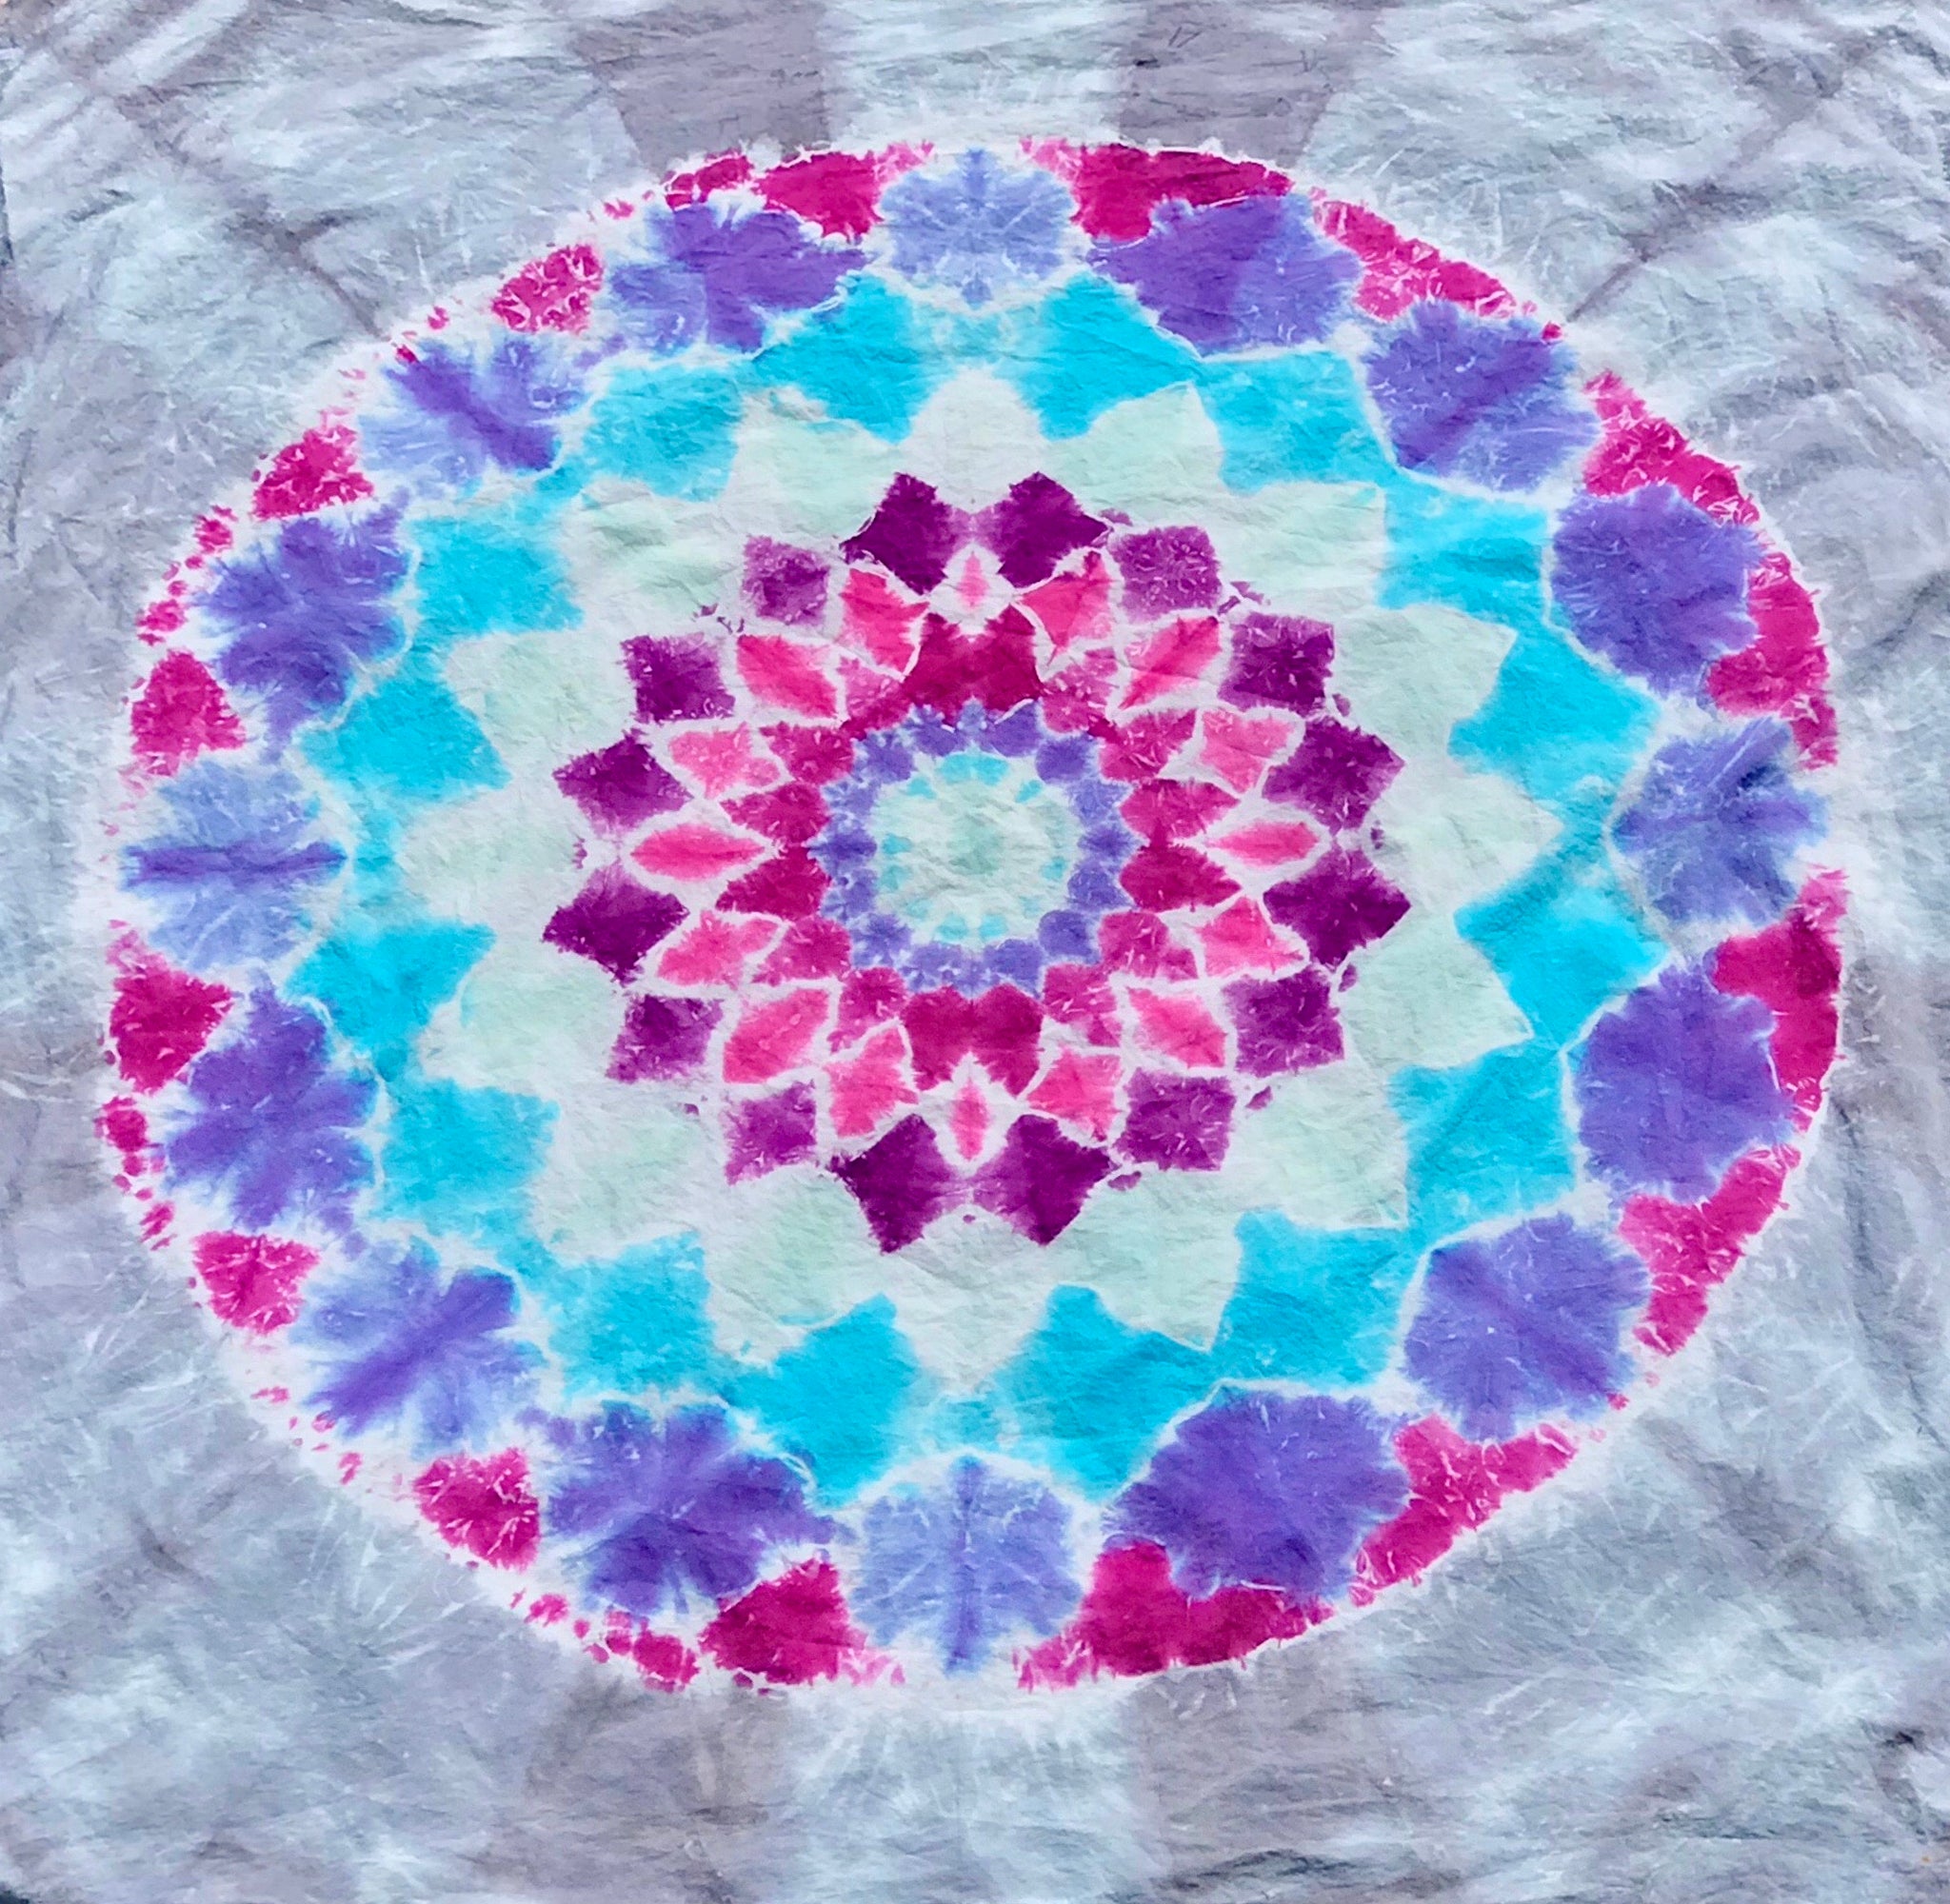 5'x5' Cool Gray Mandala Tie-dyed Tapestry/Wall Hanging